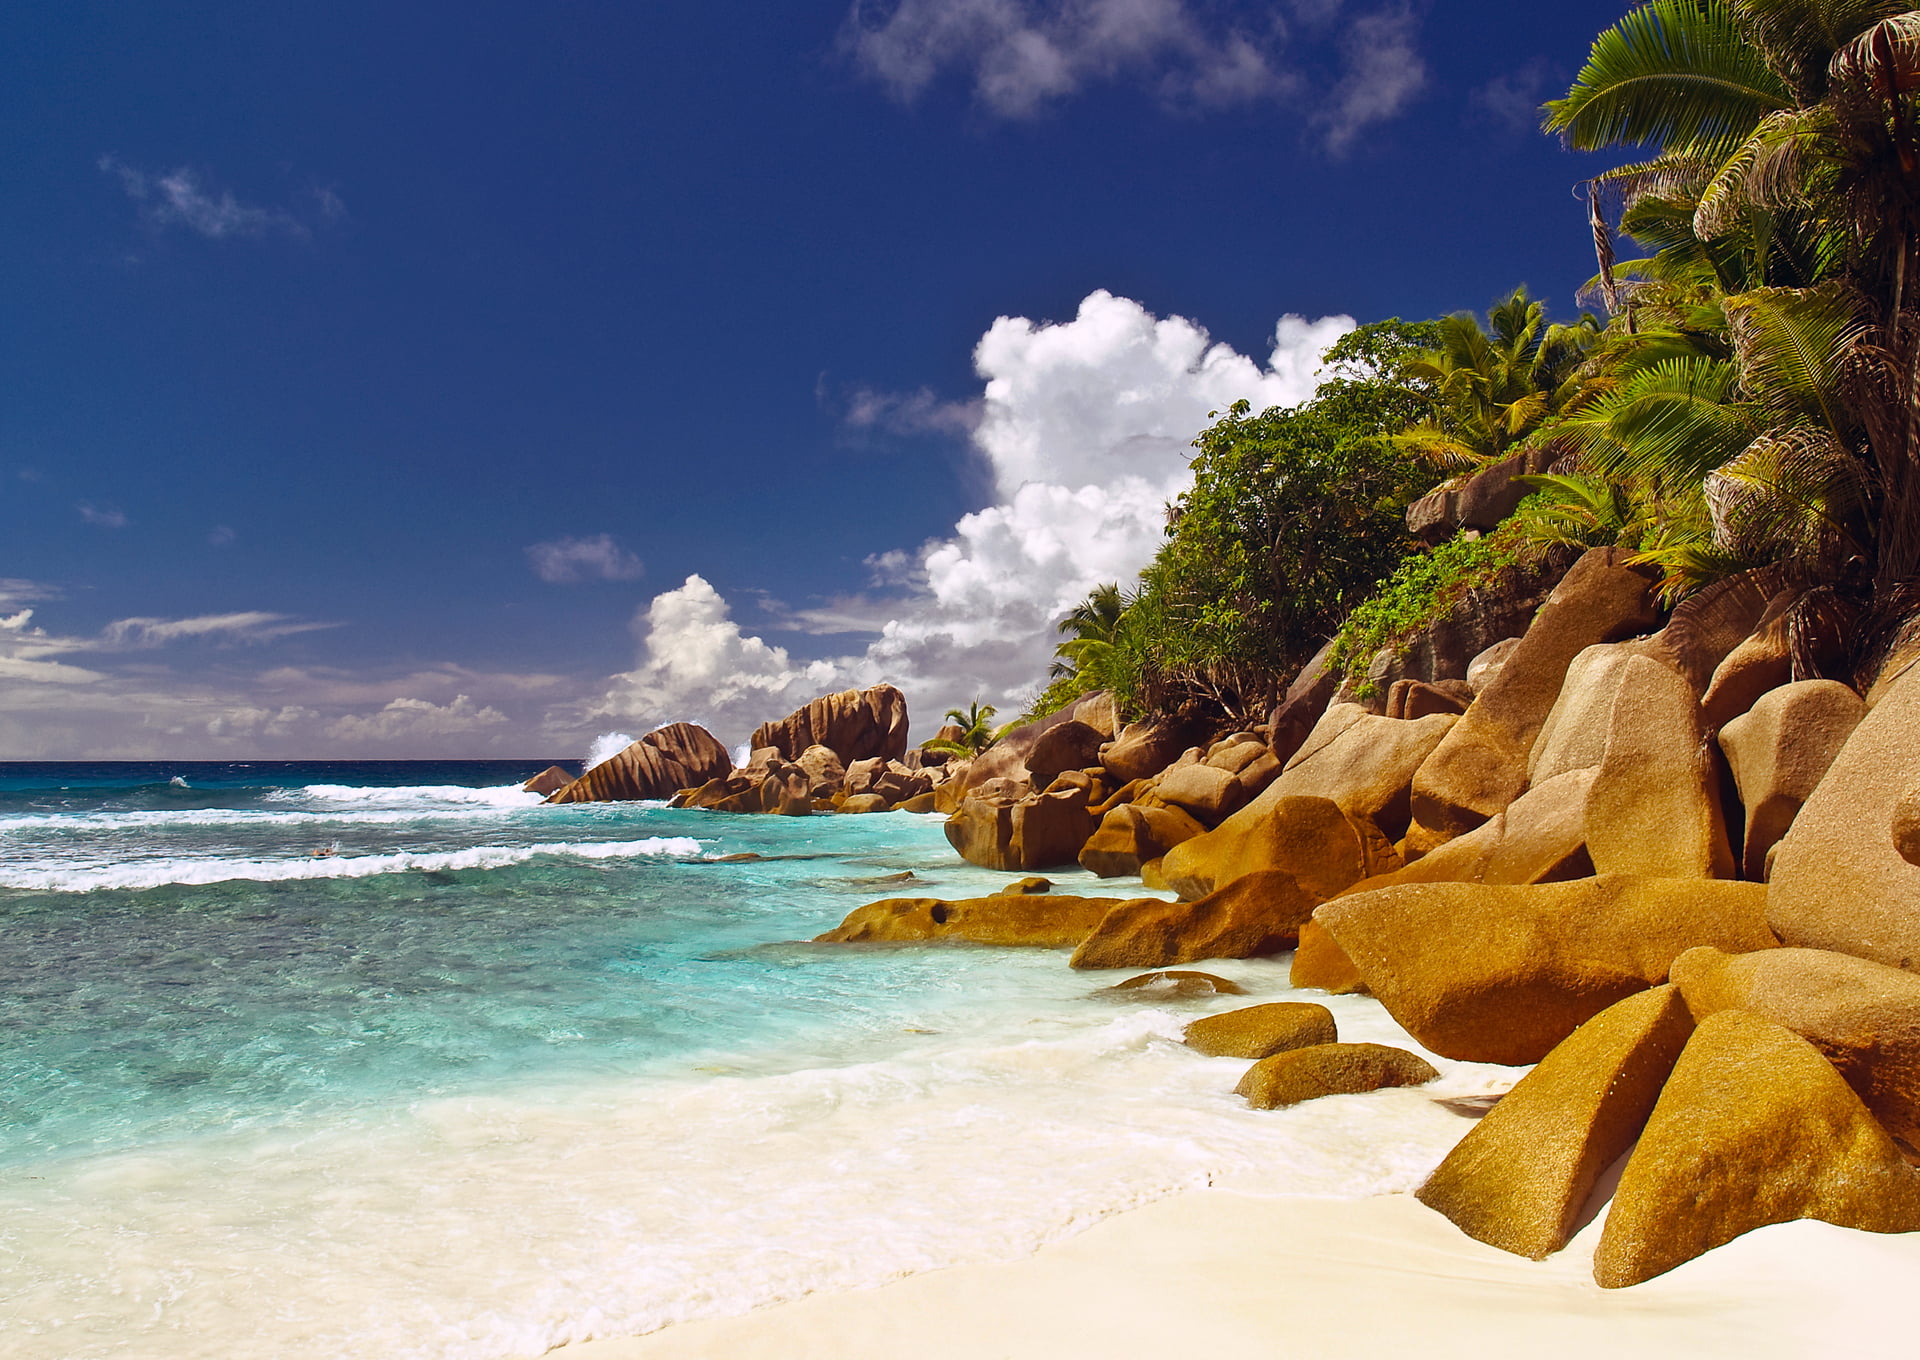 brown boulders, sea, beach, the sky, water, Islands, clouds, palm trees